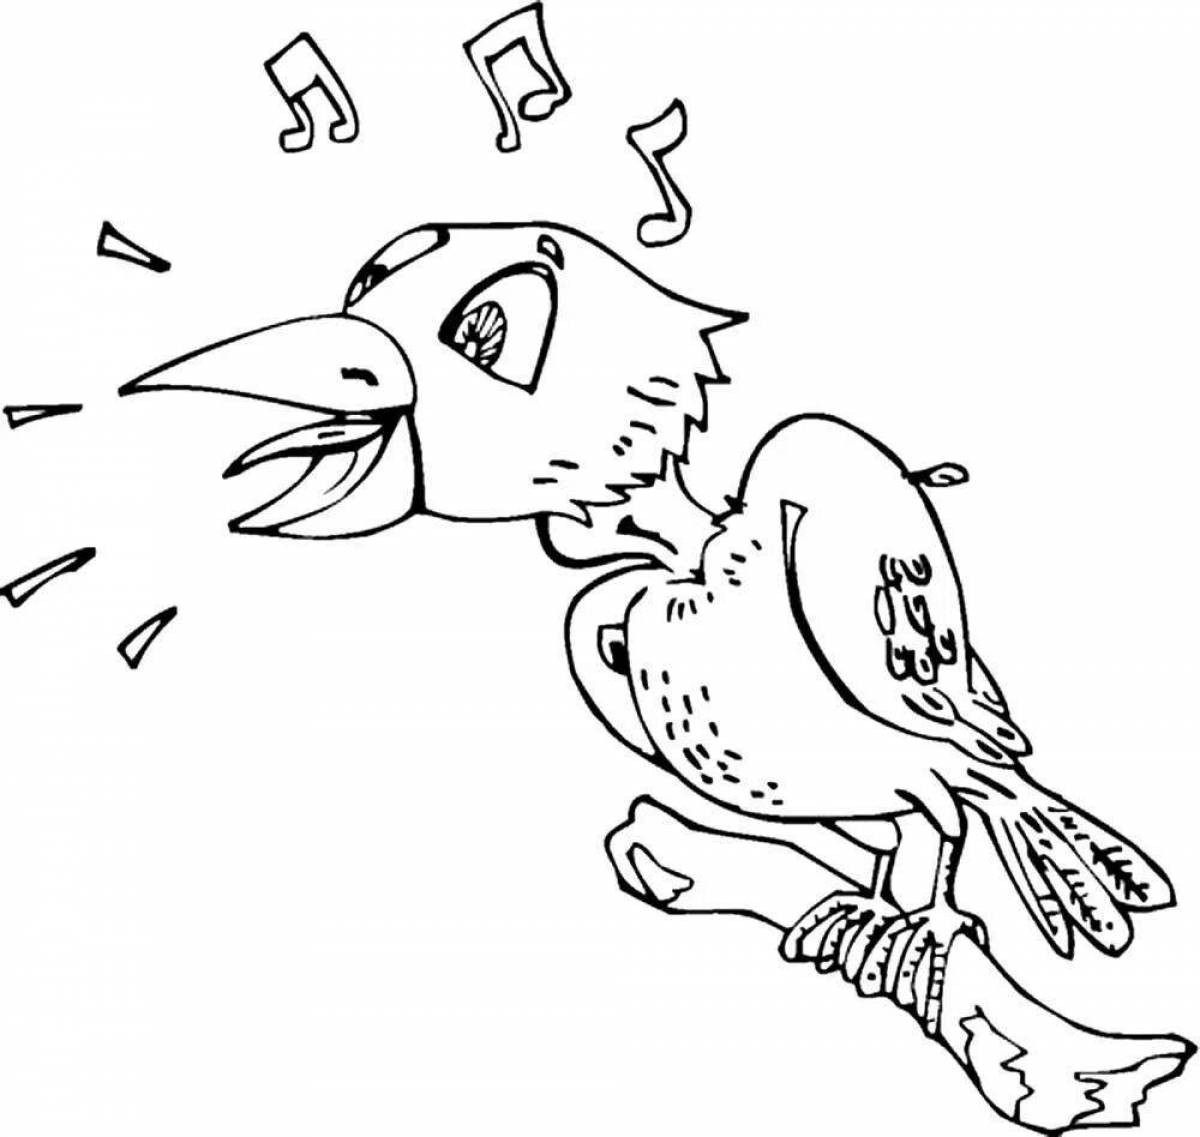 Glitter crow and fox coloring page